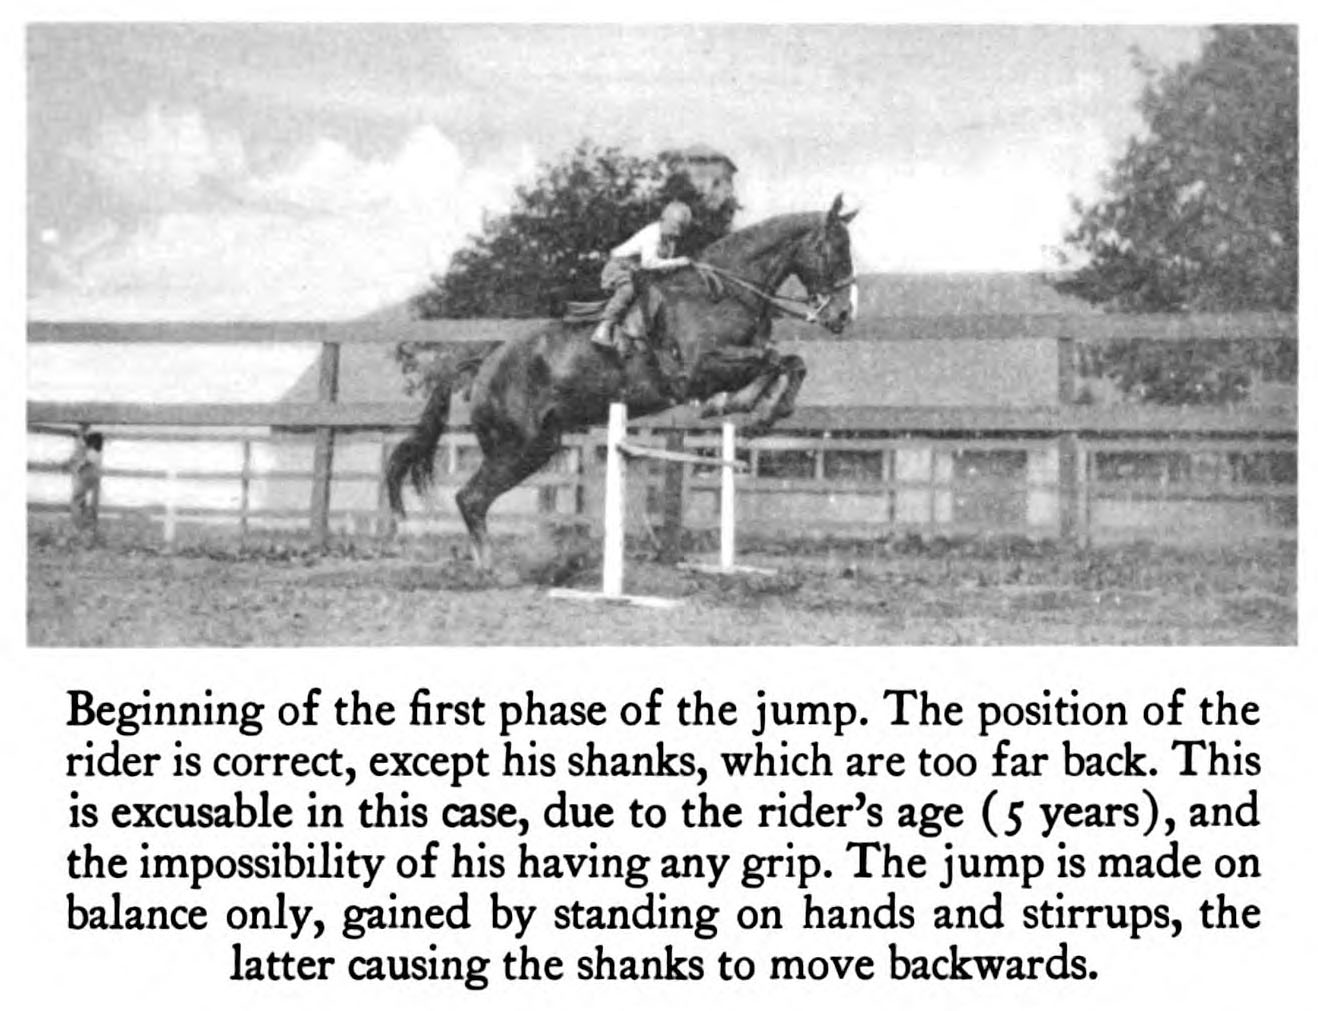 Jumping the horse by Captain Littaeur, New York, 1931, extrait 1